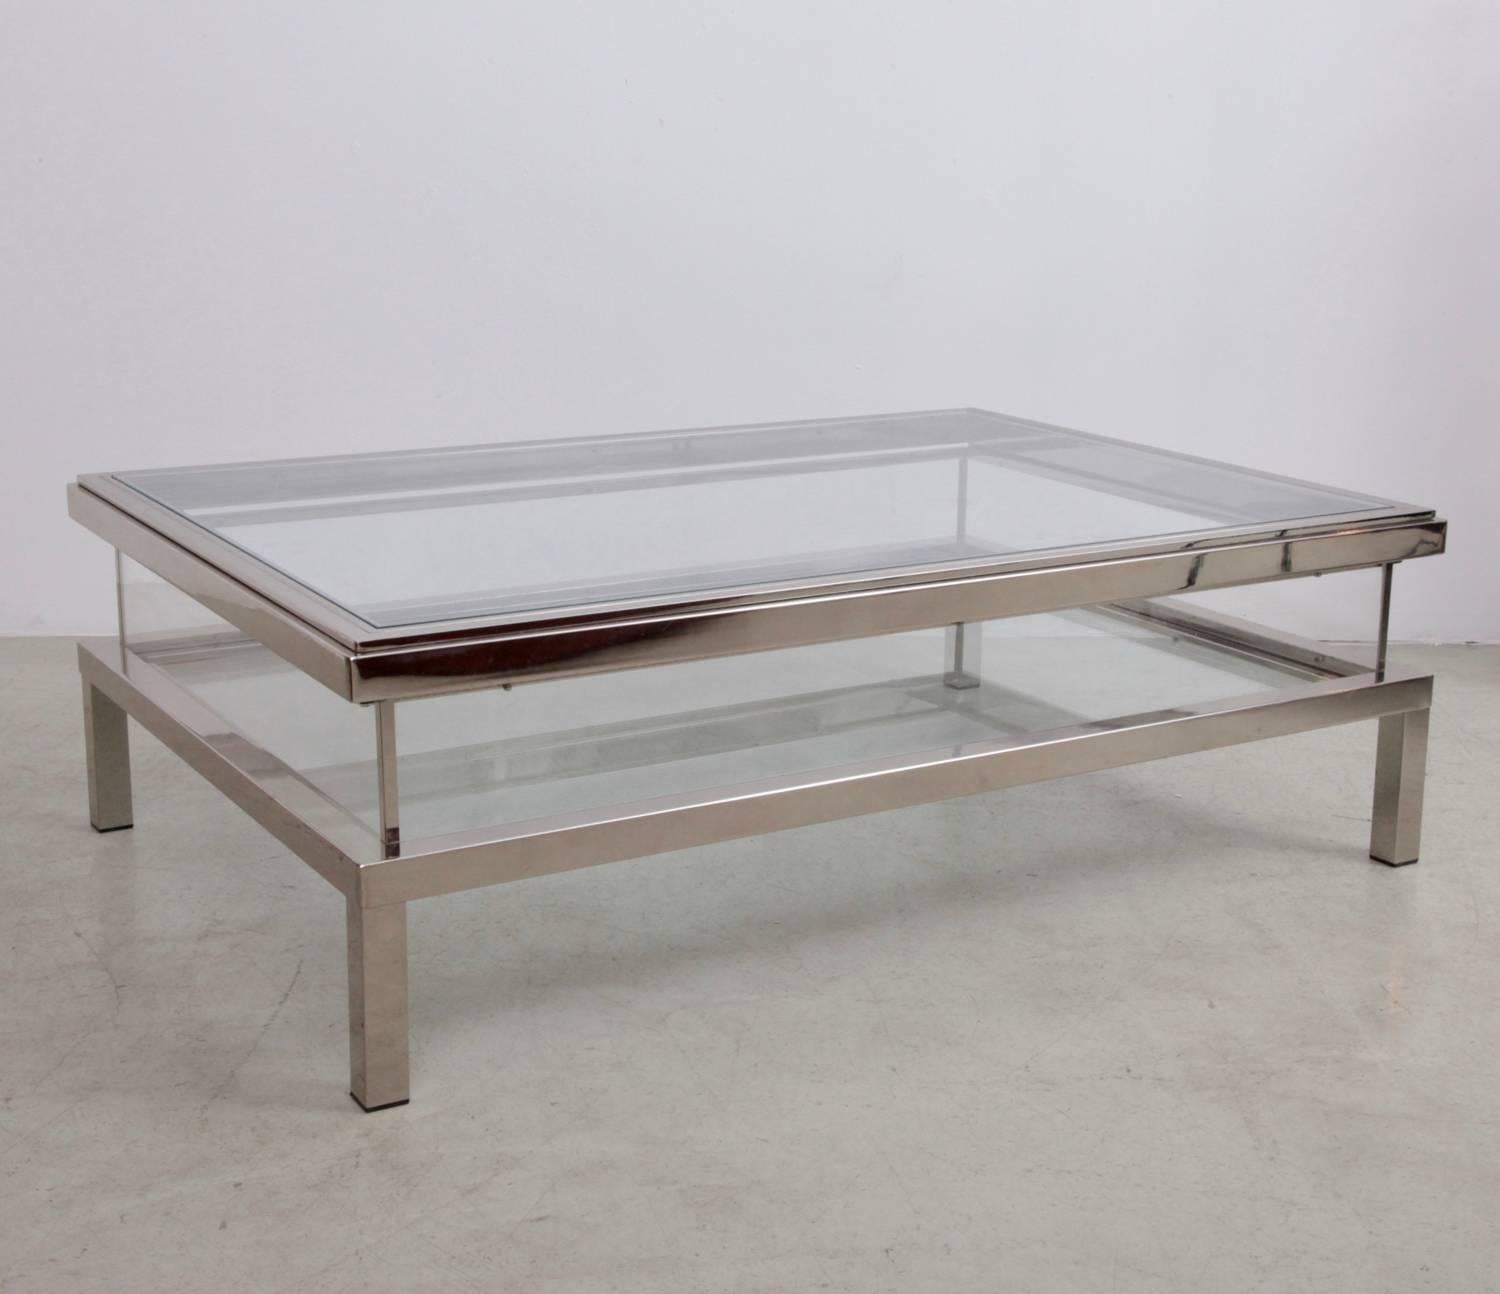 Rare large version of the Maison Jansen sliding top coffee table.